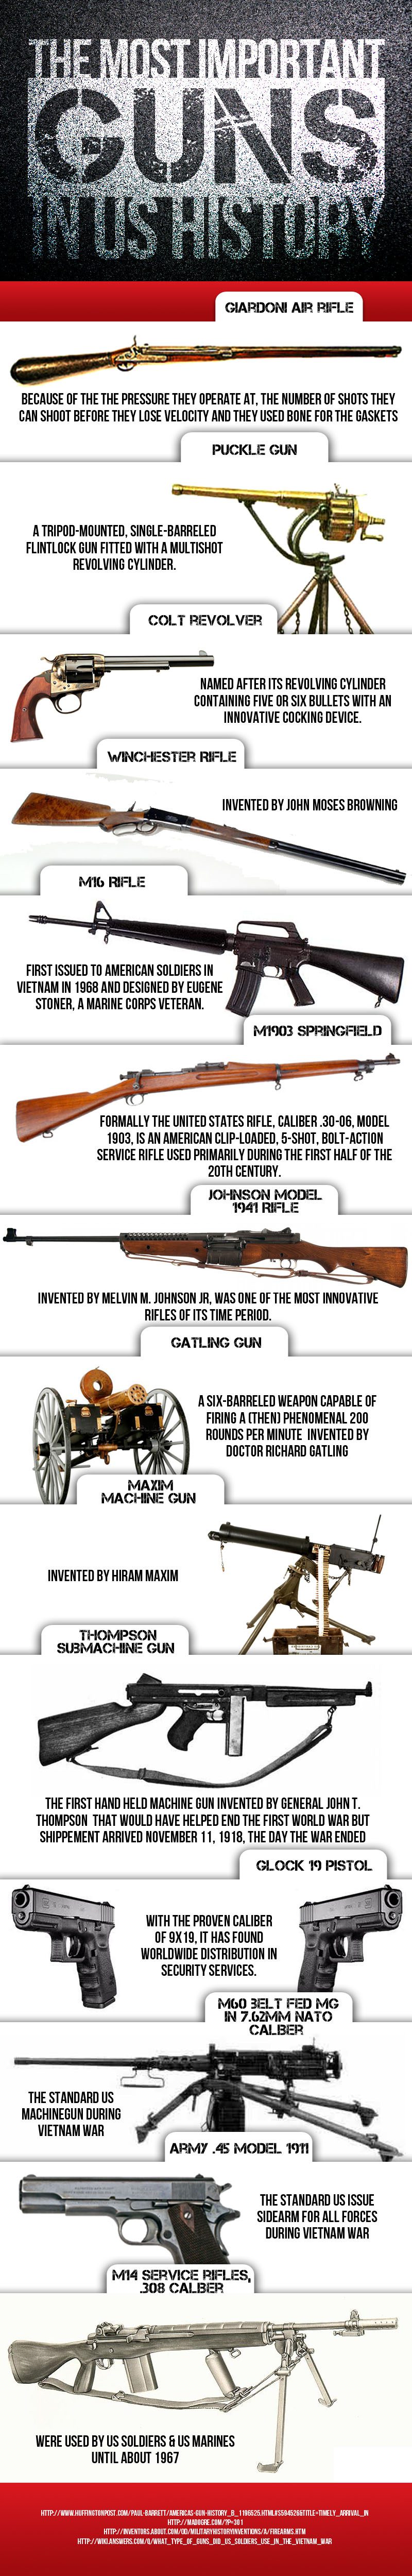 History of Guns and Technologies